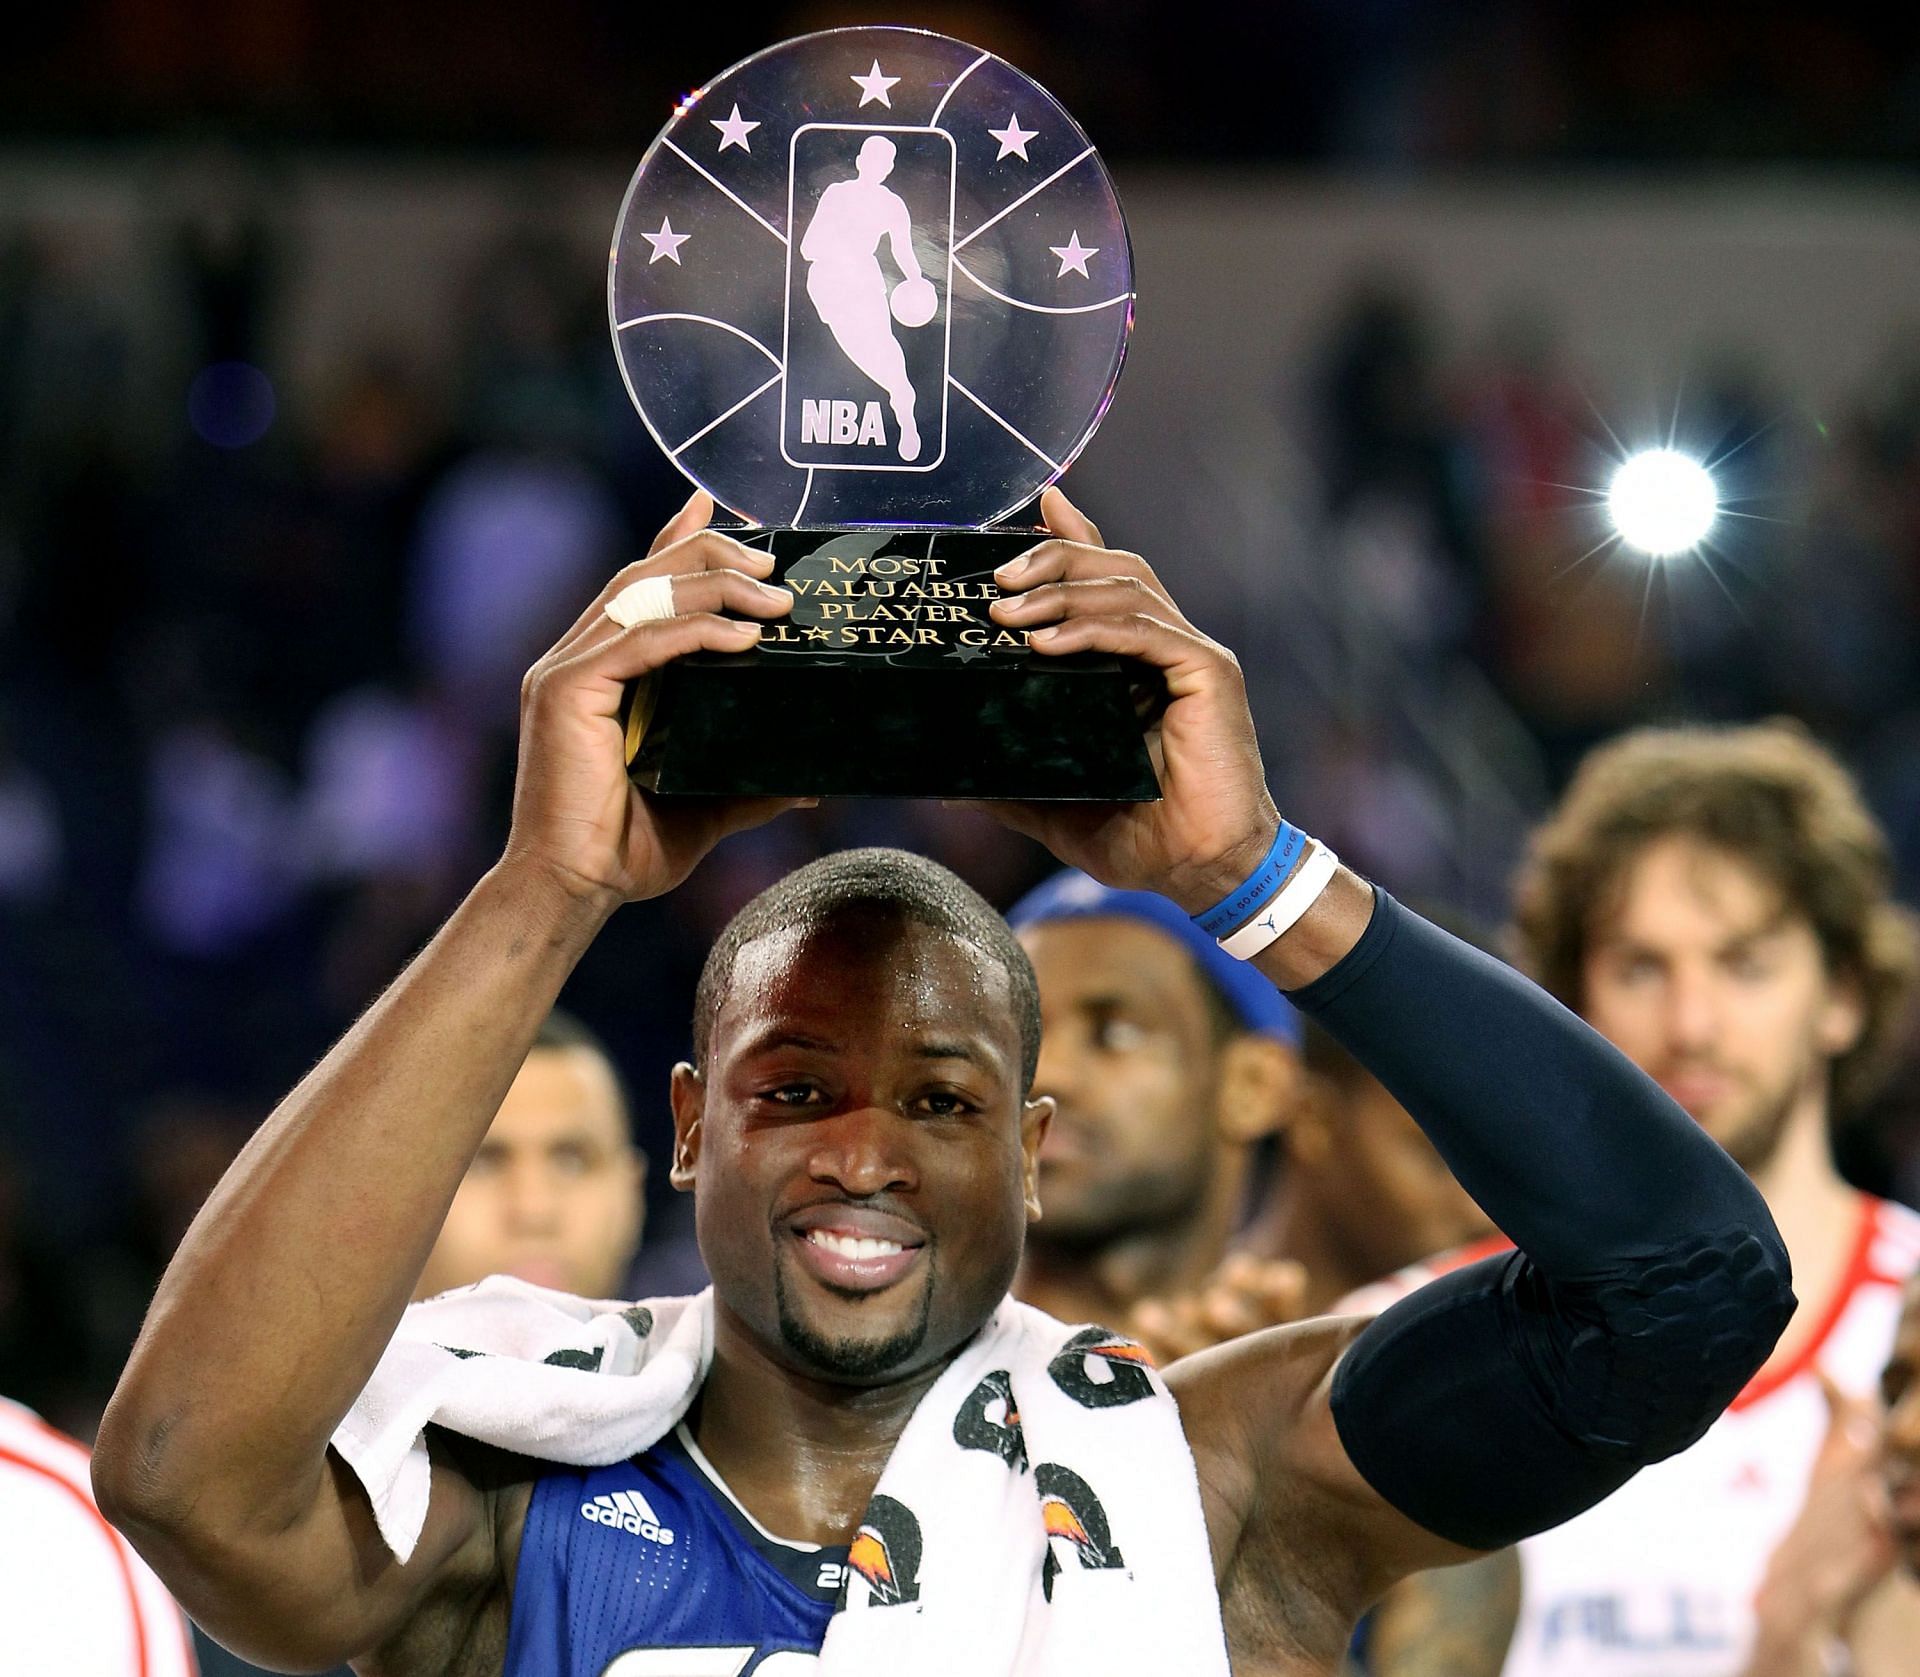 Dwyane Wade #3 of the Eastern Conference celebrates with the trophy after being named the MVP of the NBA All-Star Game, part of 2010 NBA All-Star Weekend at Cowboys Stadium on February 14, 2010 in Arlington, Texas.